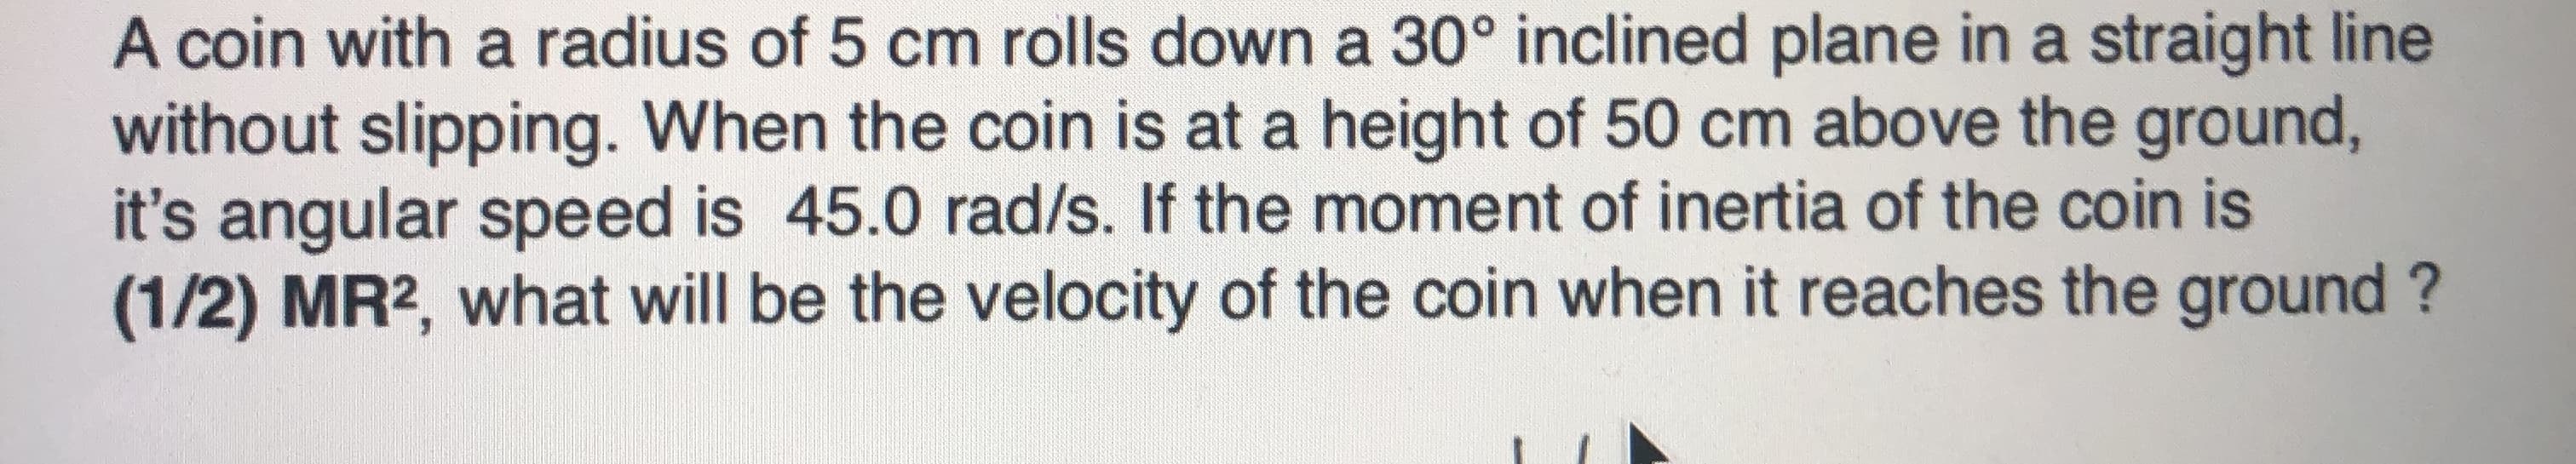 A coin with a radius of 5 cm rolls down a 30° inclined plane in a straight line
without slipping. When the coin is at a height of 50 cm above the ground,
it's angular speed is 45.0 rad/s. If the moment of inertia of the coin is
(1/2) MR2, what will be the velocity of the coin when it reaches the ground ?
